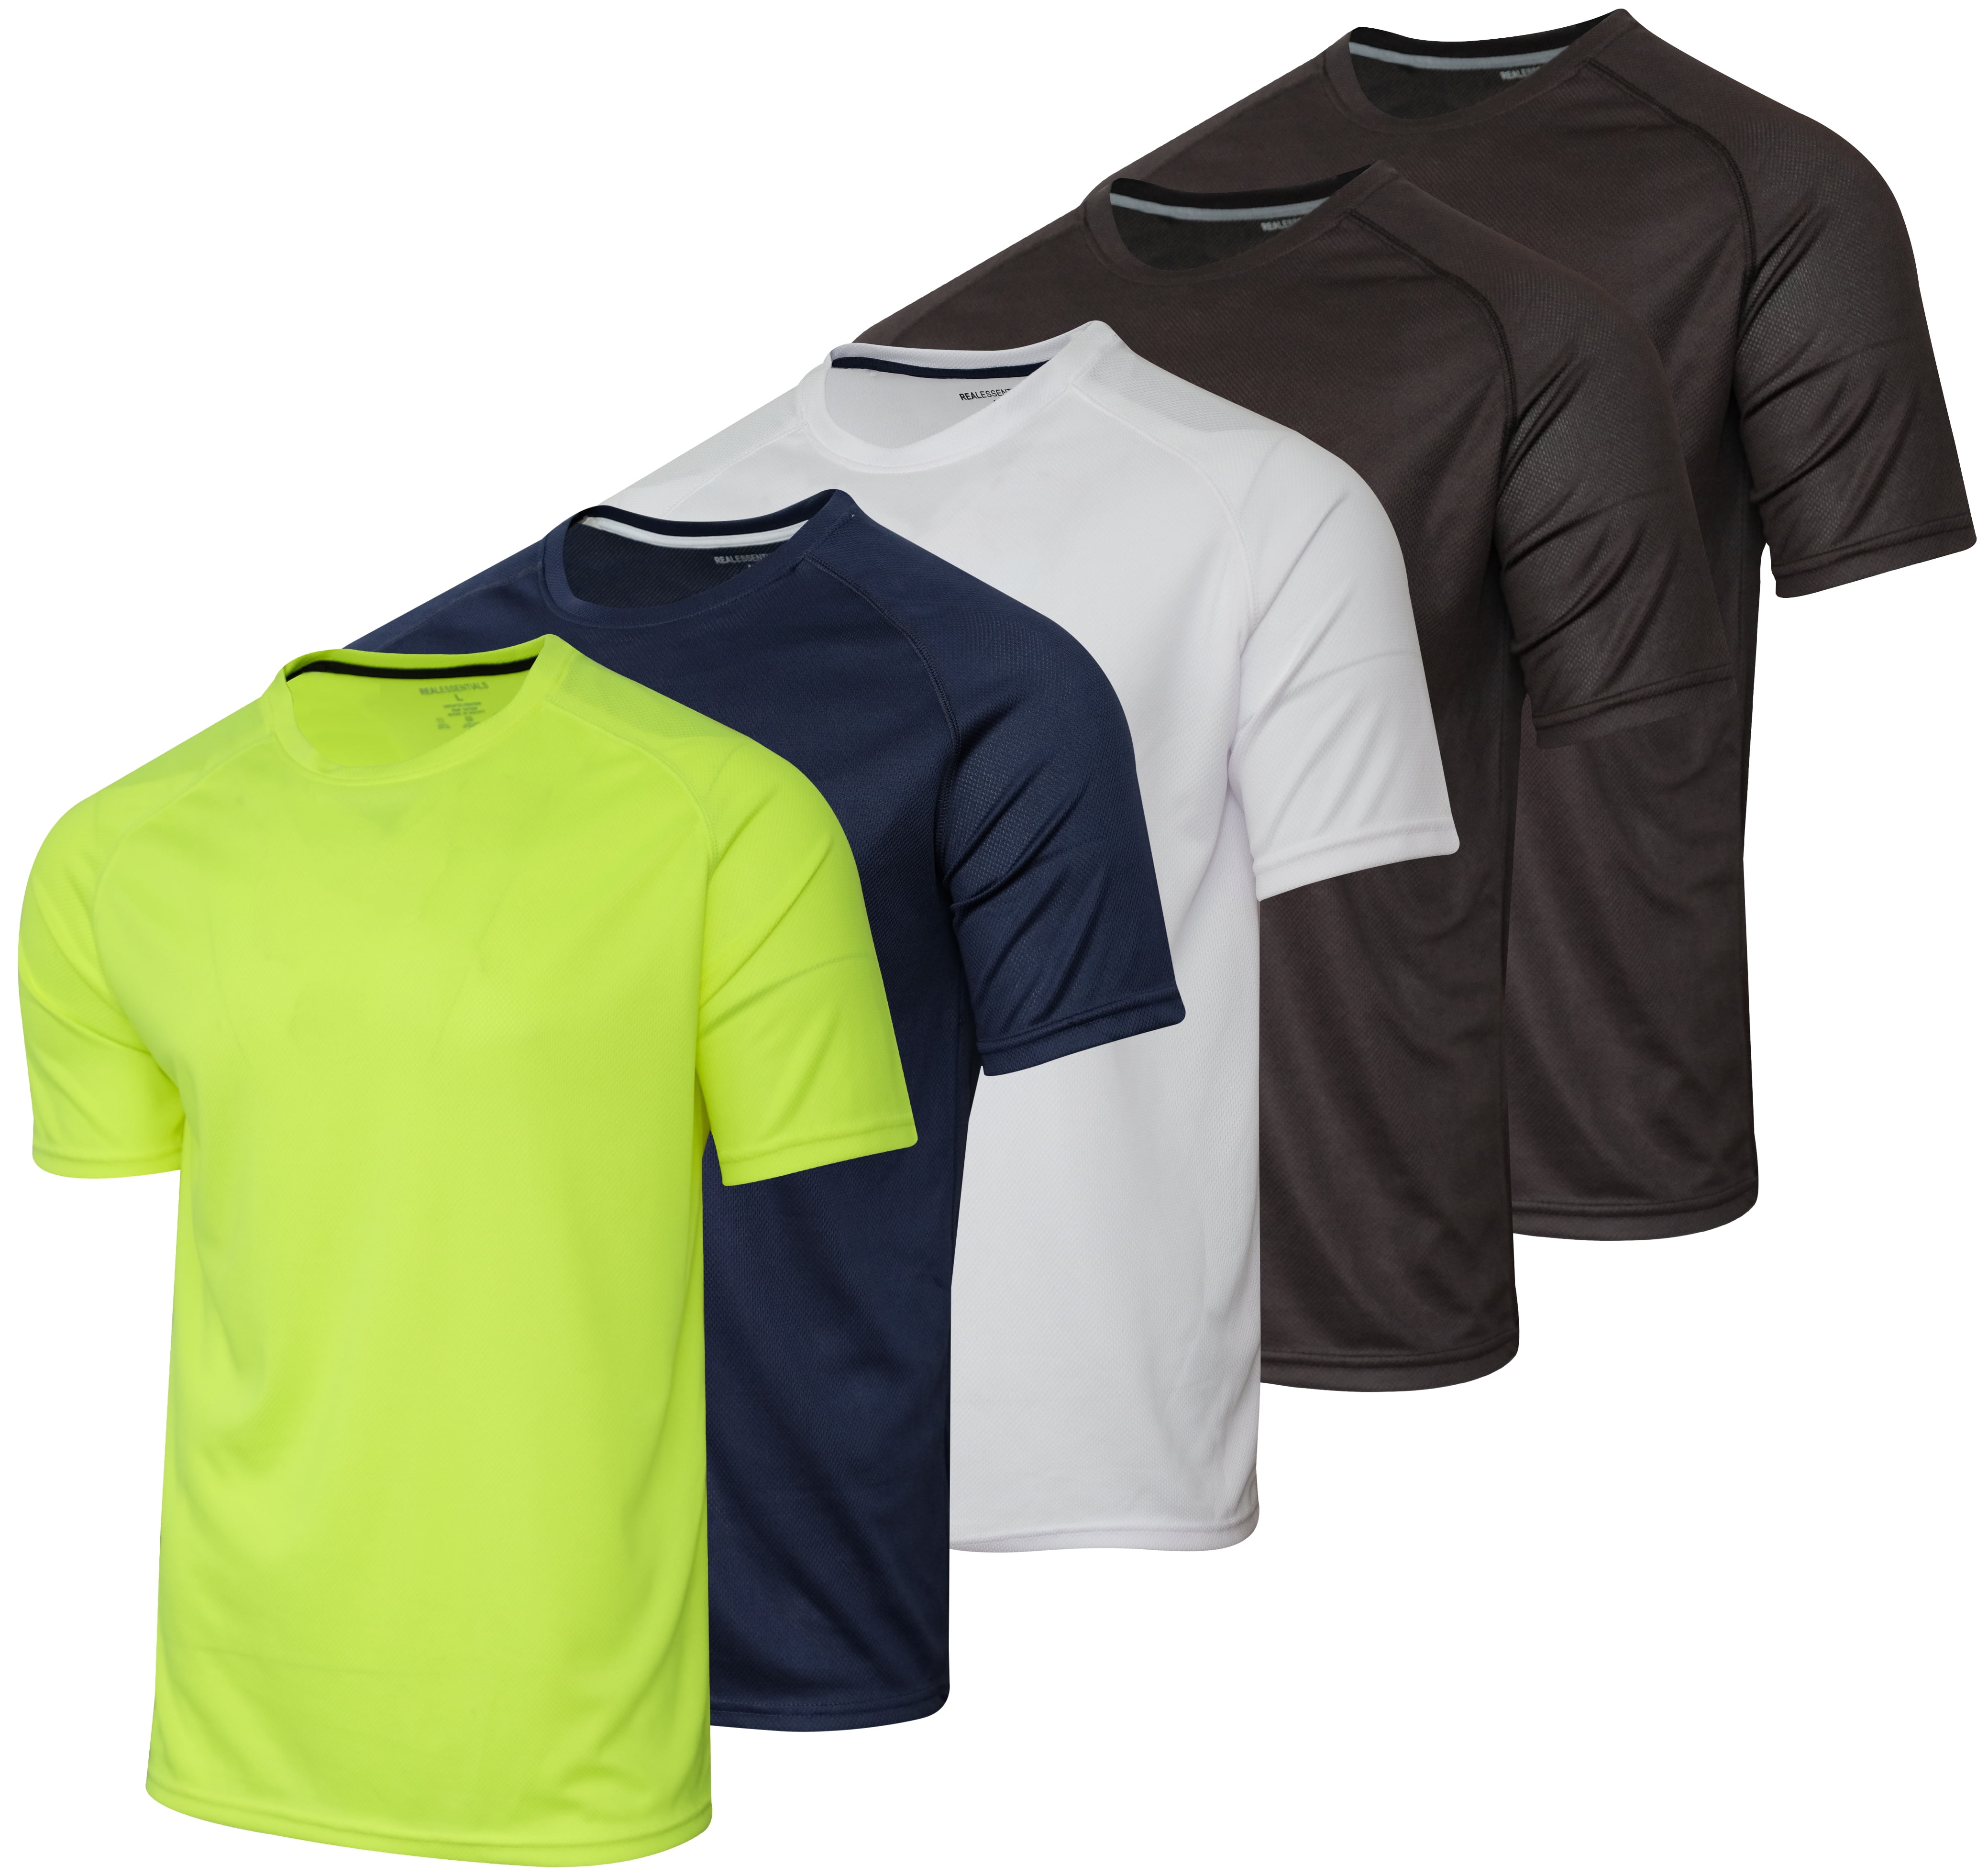 Youth Dry-Fit Moisture Wicking Active Athletic Performance Short-Sleeve T-Shirt Boys & Girls 5 Pack 